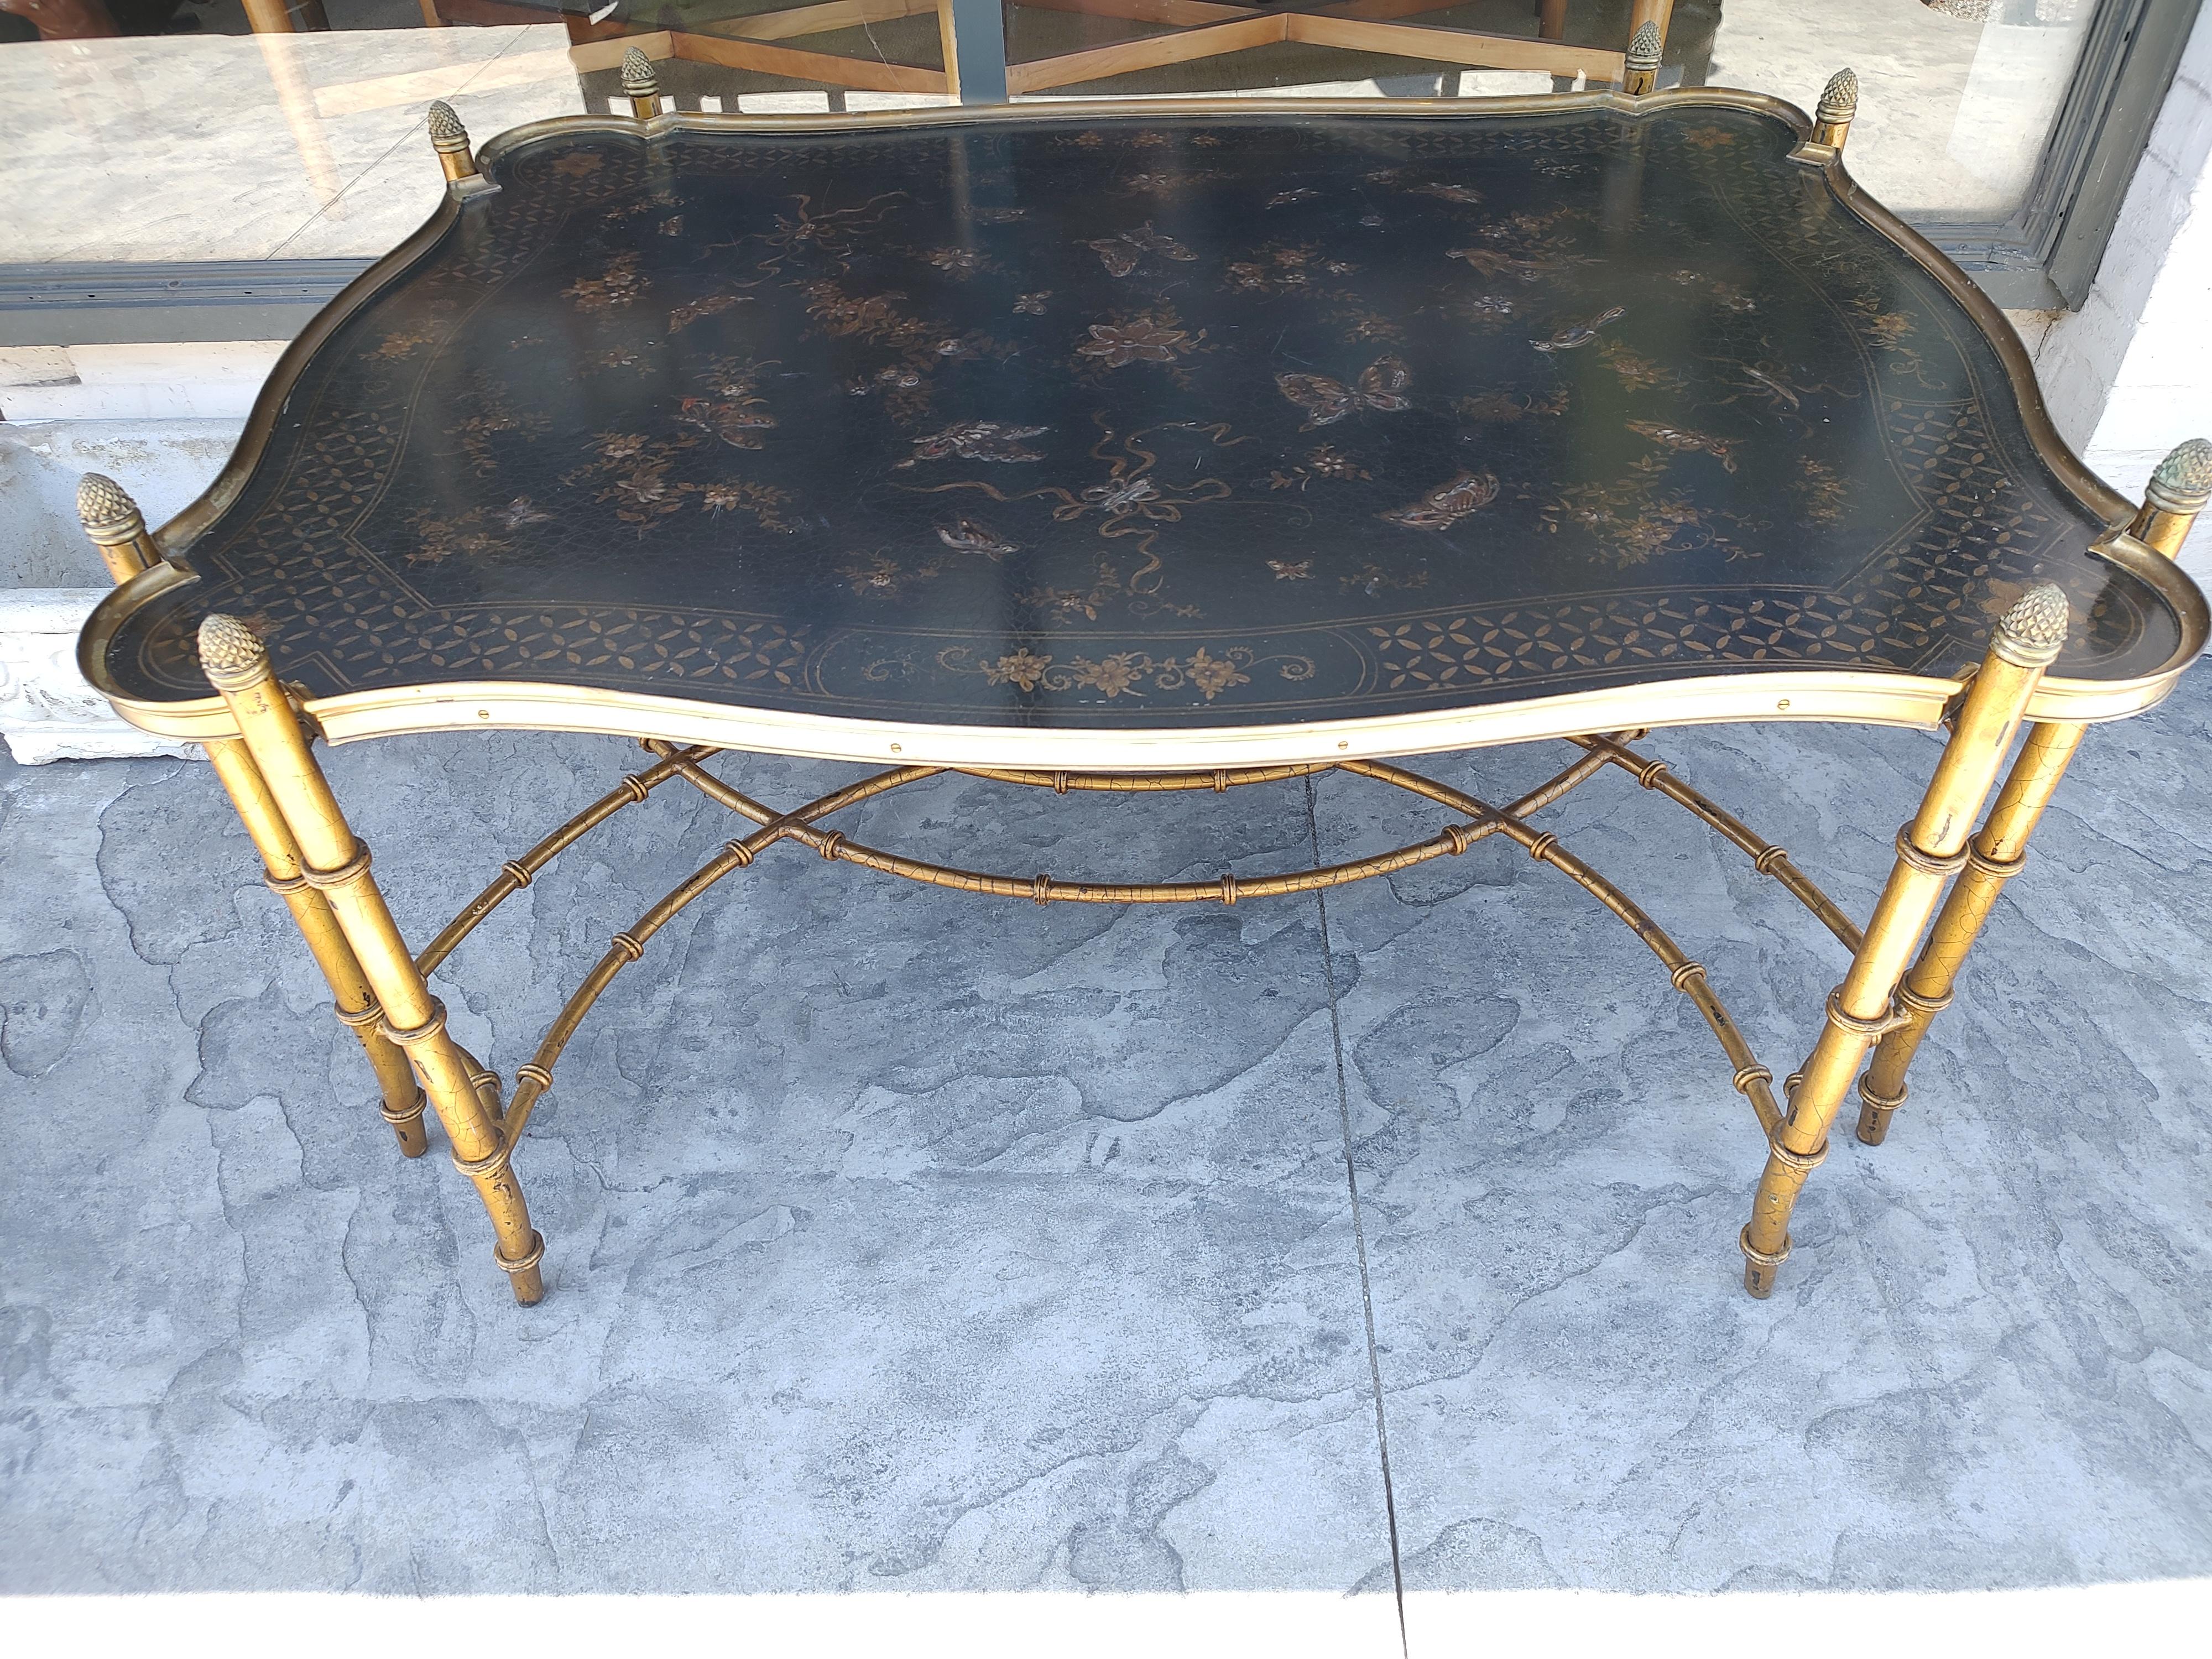 Fabulous and high quality design with embossed tray style top. Butterflies and birds dominate the top in a joyful display of nature. Brass frame with gilt iron legs. Aged to perfection. Well cared for. In excellent vintage condition with minimal